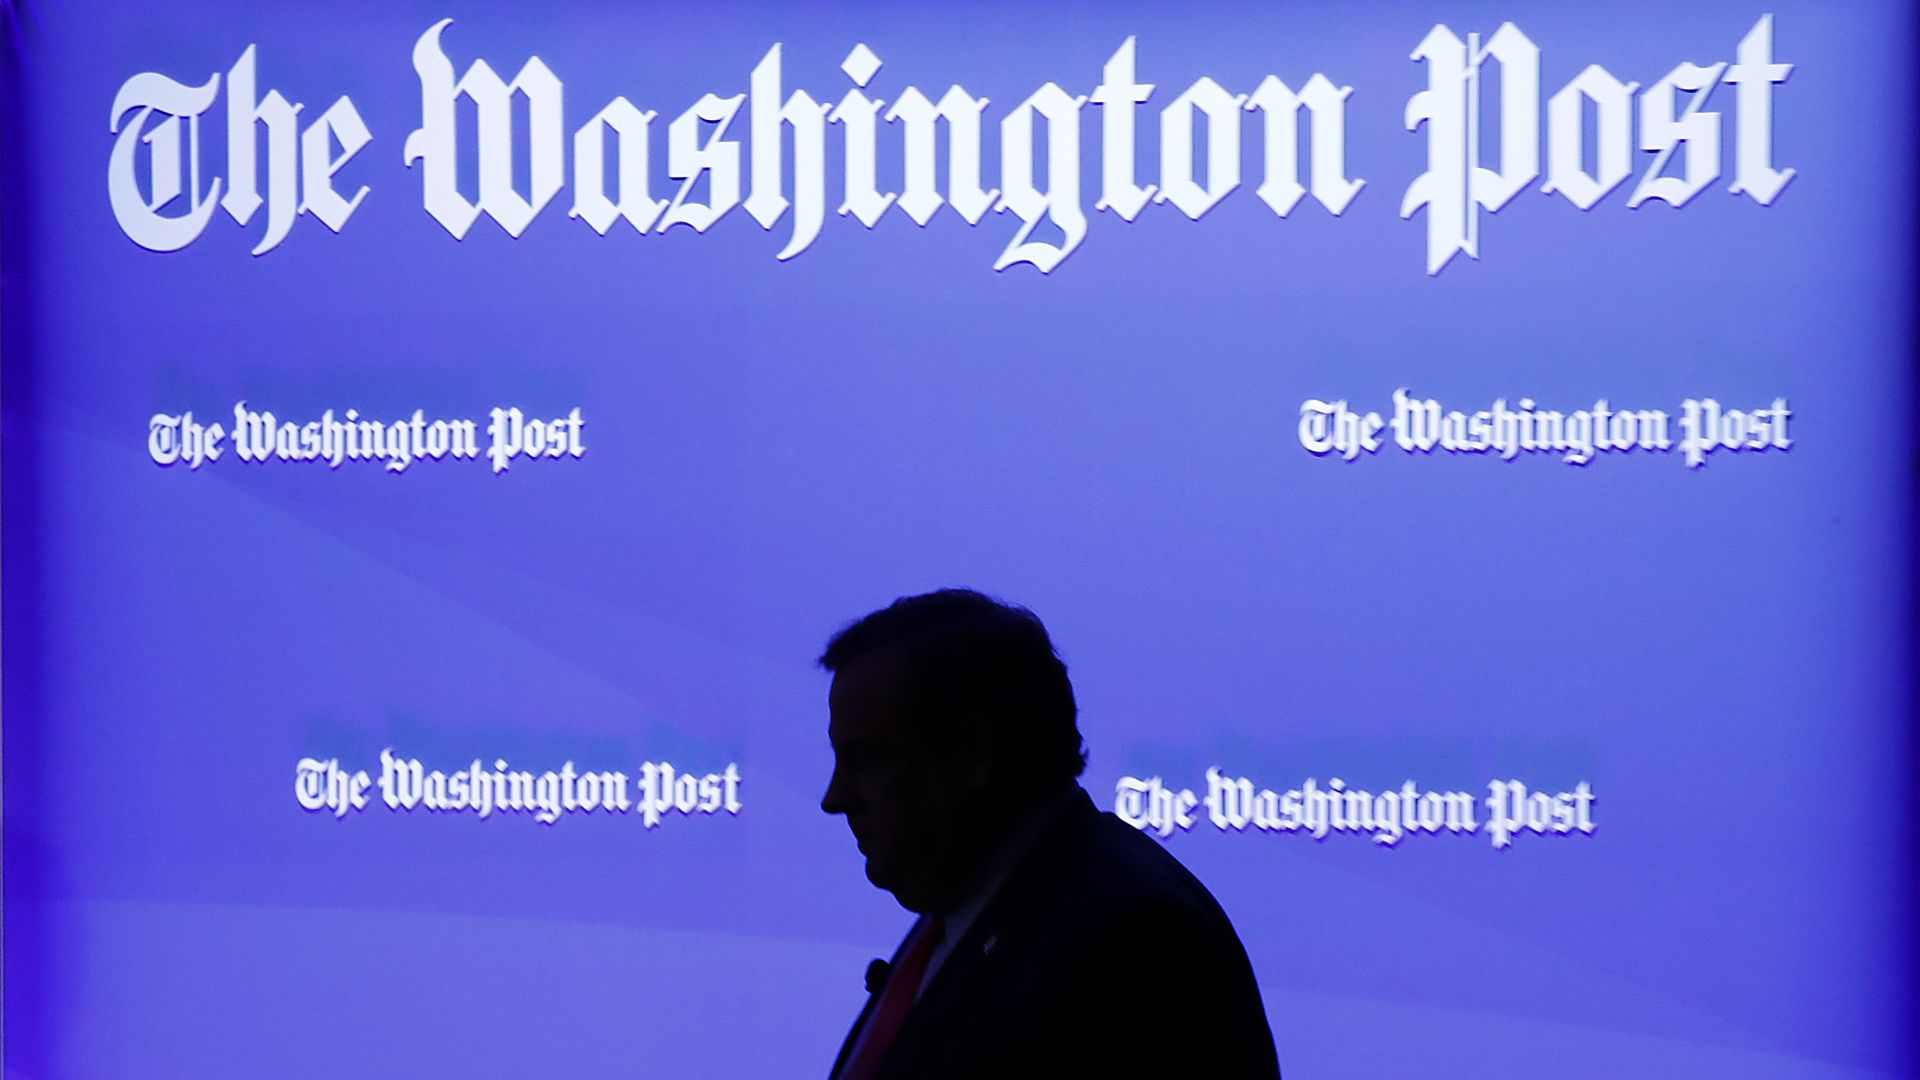 Silhouette of a man before wall with logos of The Washington Post.